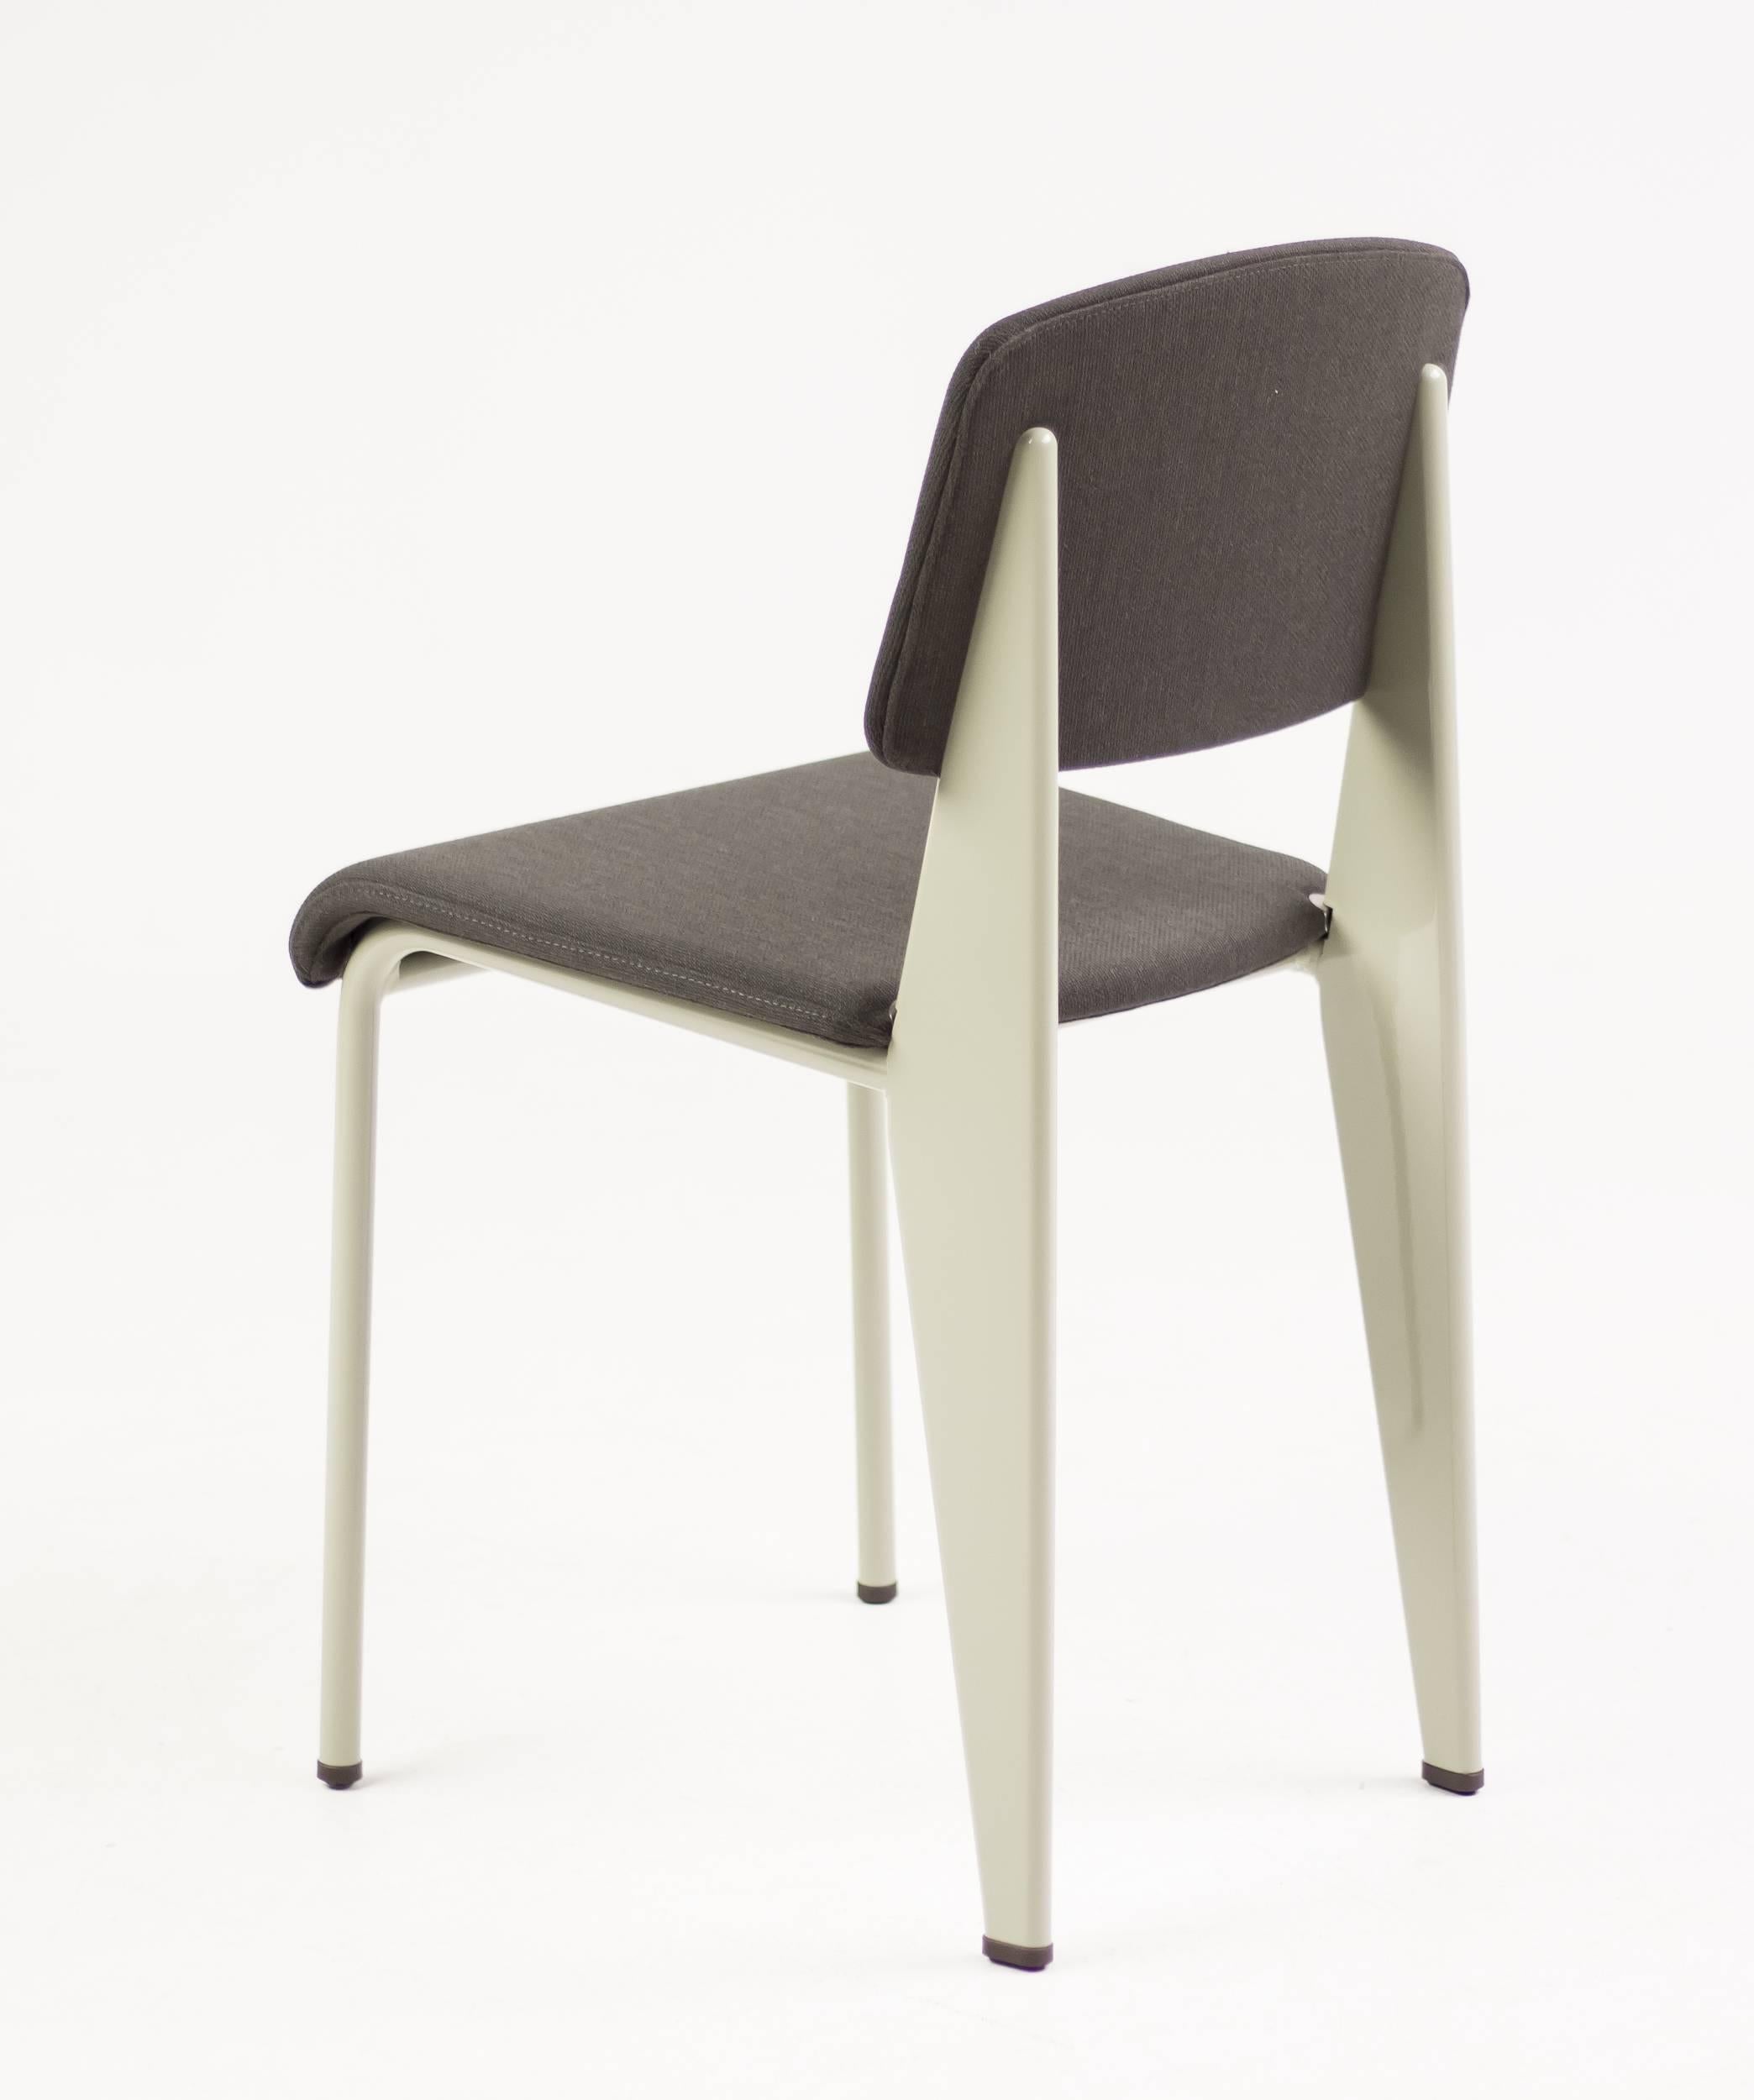 A prouvé standard SR (Siège Remboursé) of the limited Prouvé Raw office edition, a partnership between Vitra and the Dutch fashion label G-Star Raw. In this version, the iconic standard chair by Jean Prouvé is fitted with a soft fabric-covered